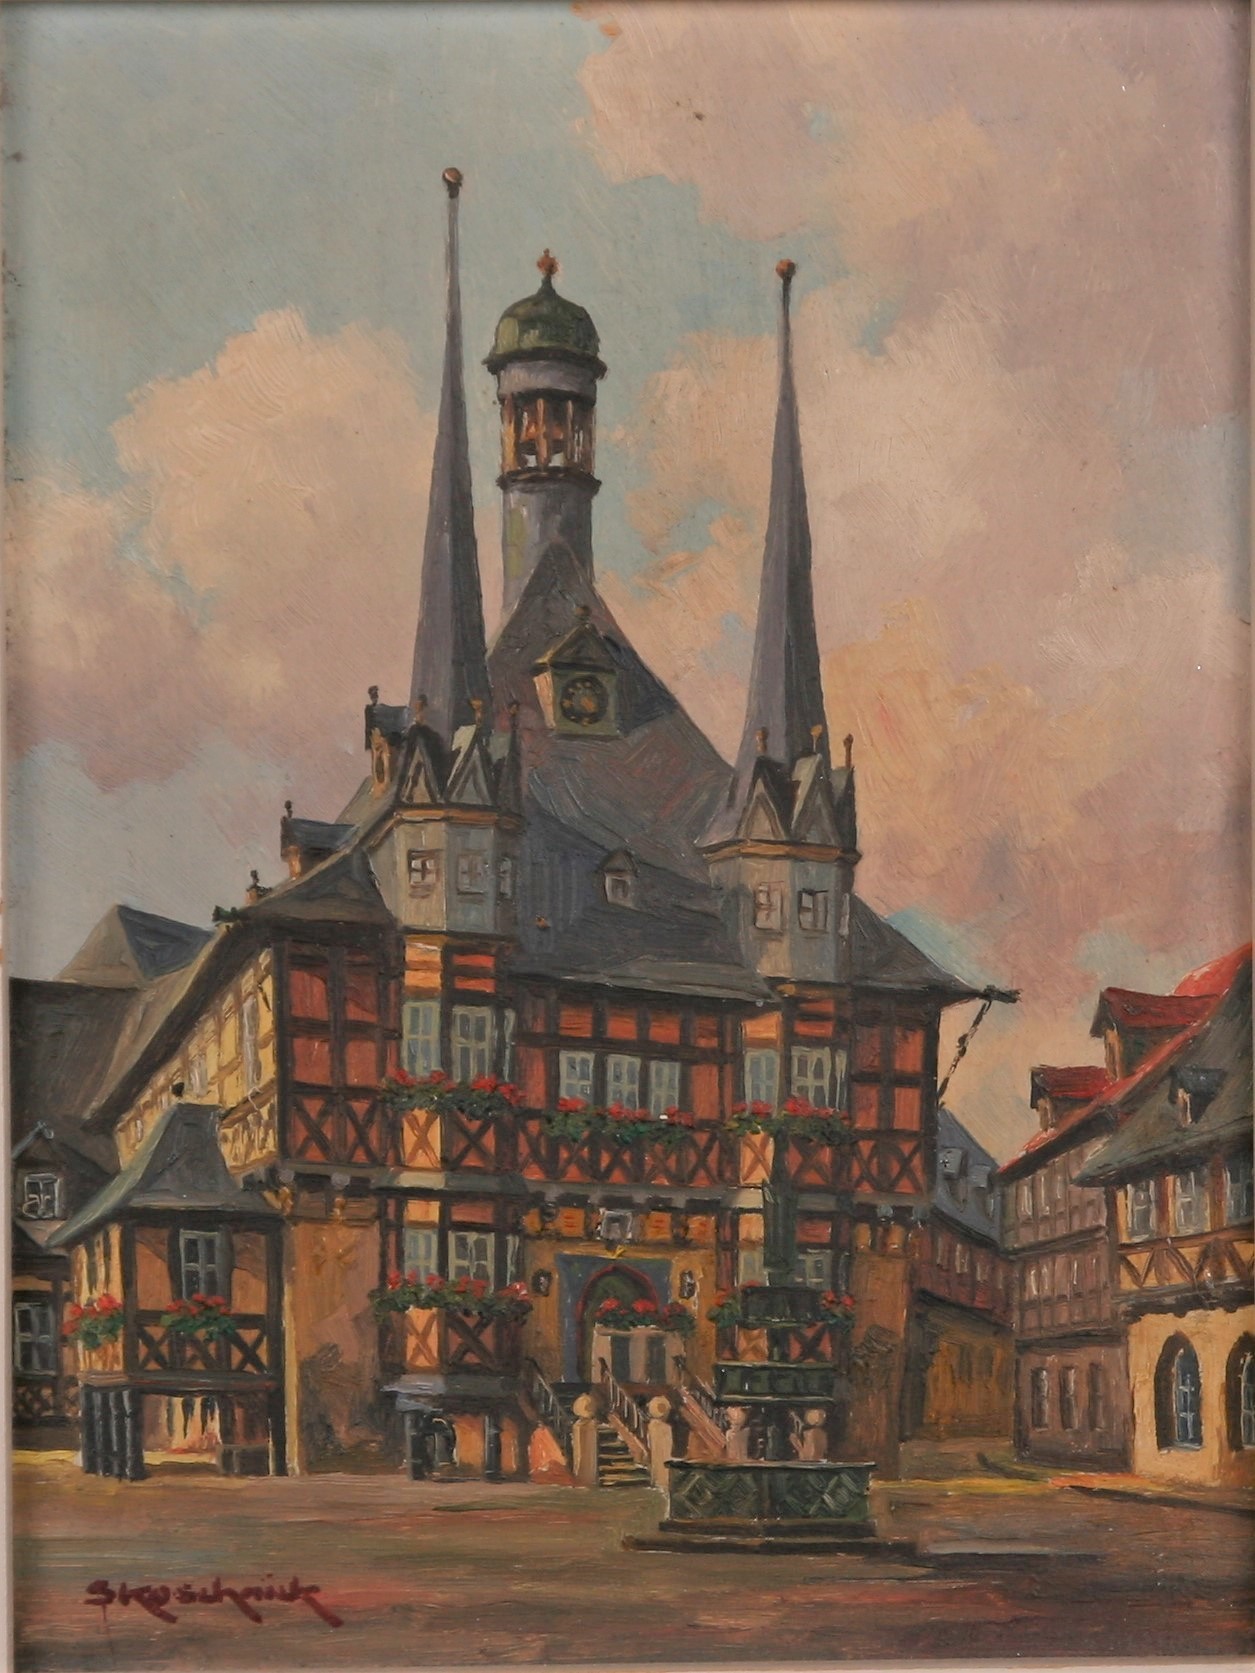 Rathaus in Wernigerode (Harzmuseum Wernigerode CC BY-NC-SA)